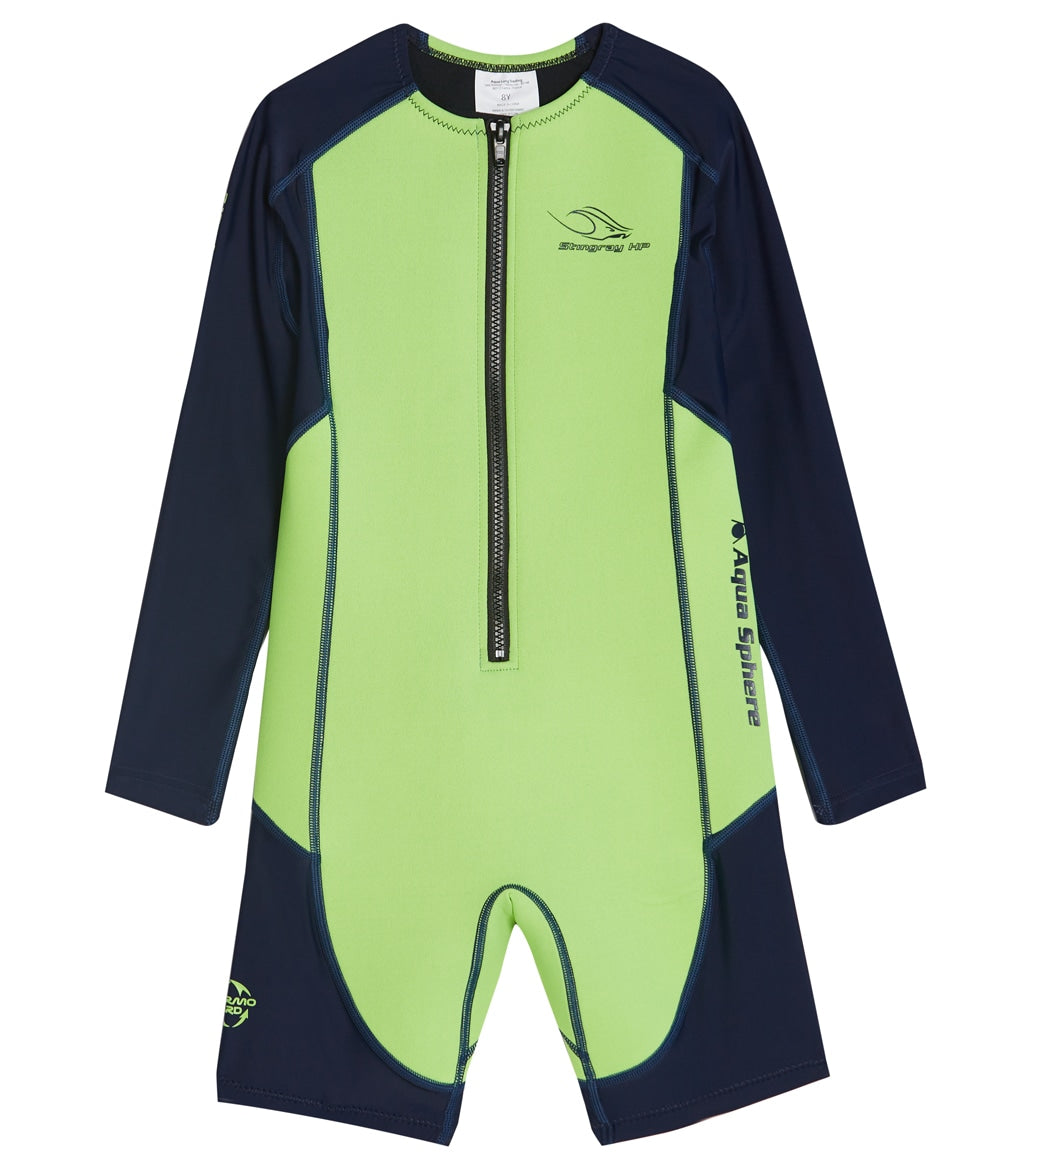 AquaSphere Stingray Hp2 Long Sleeve Thermal Suit at SwimOutlet.com